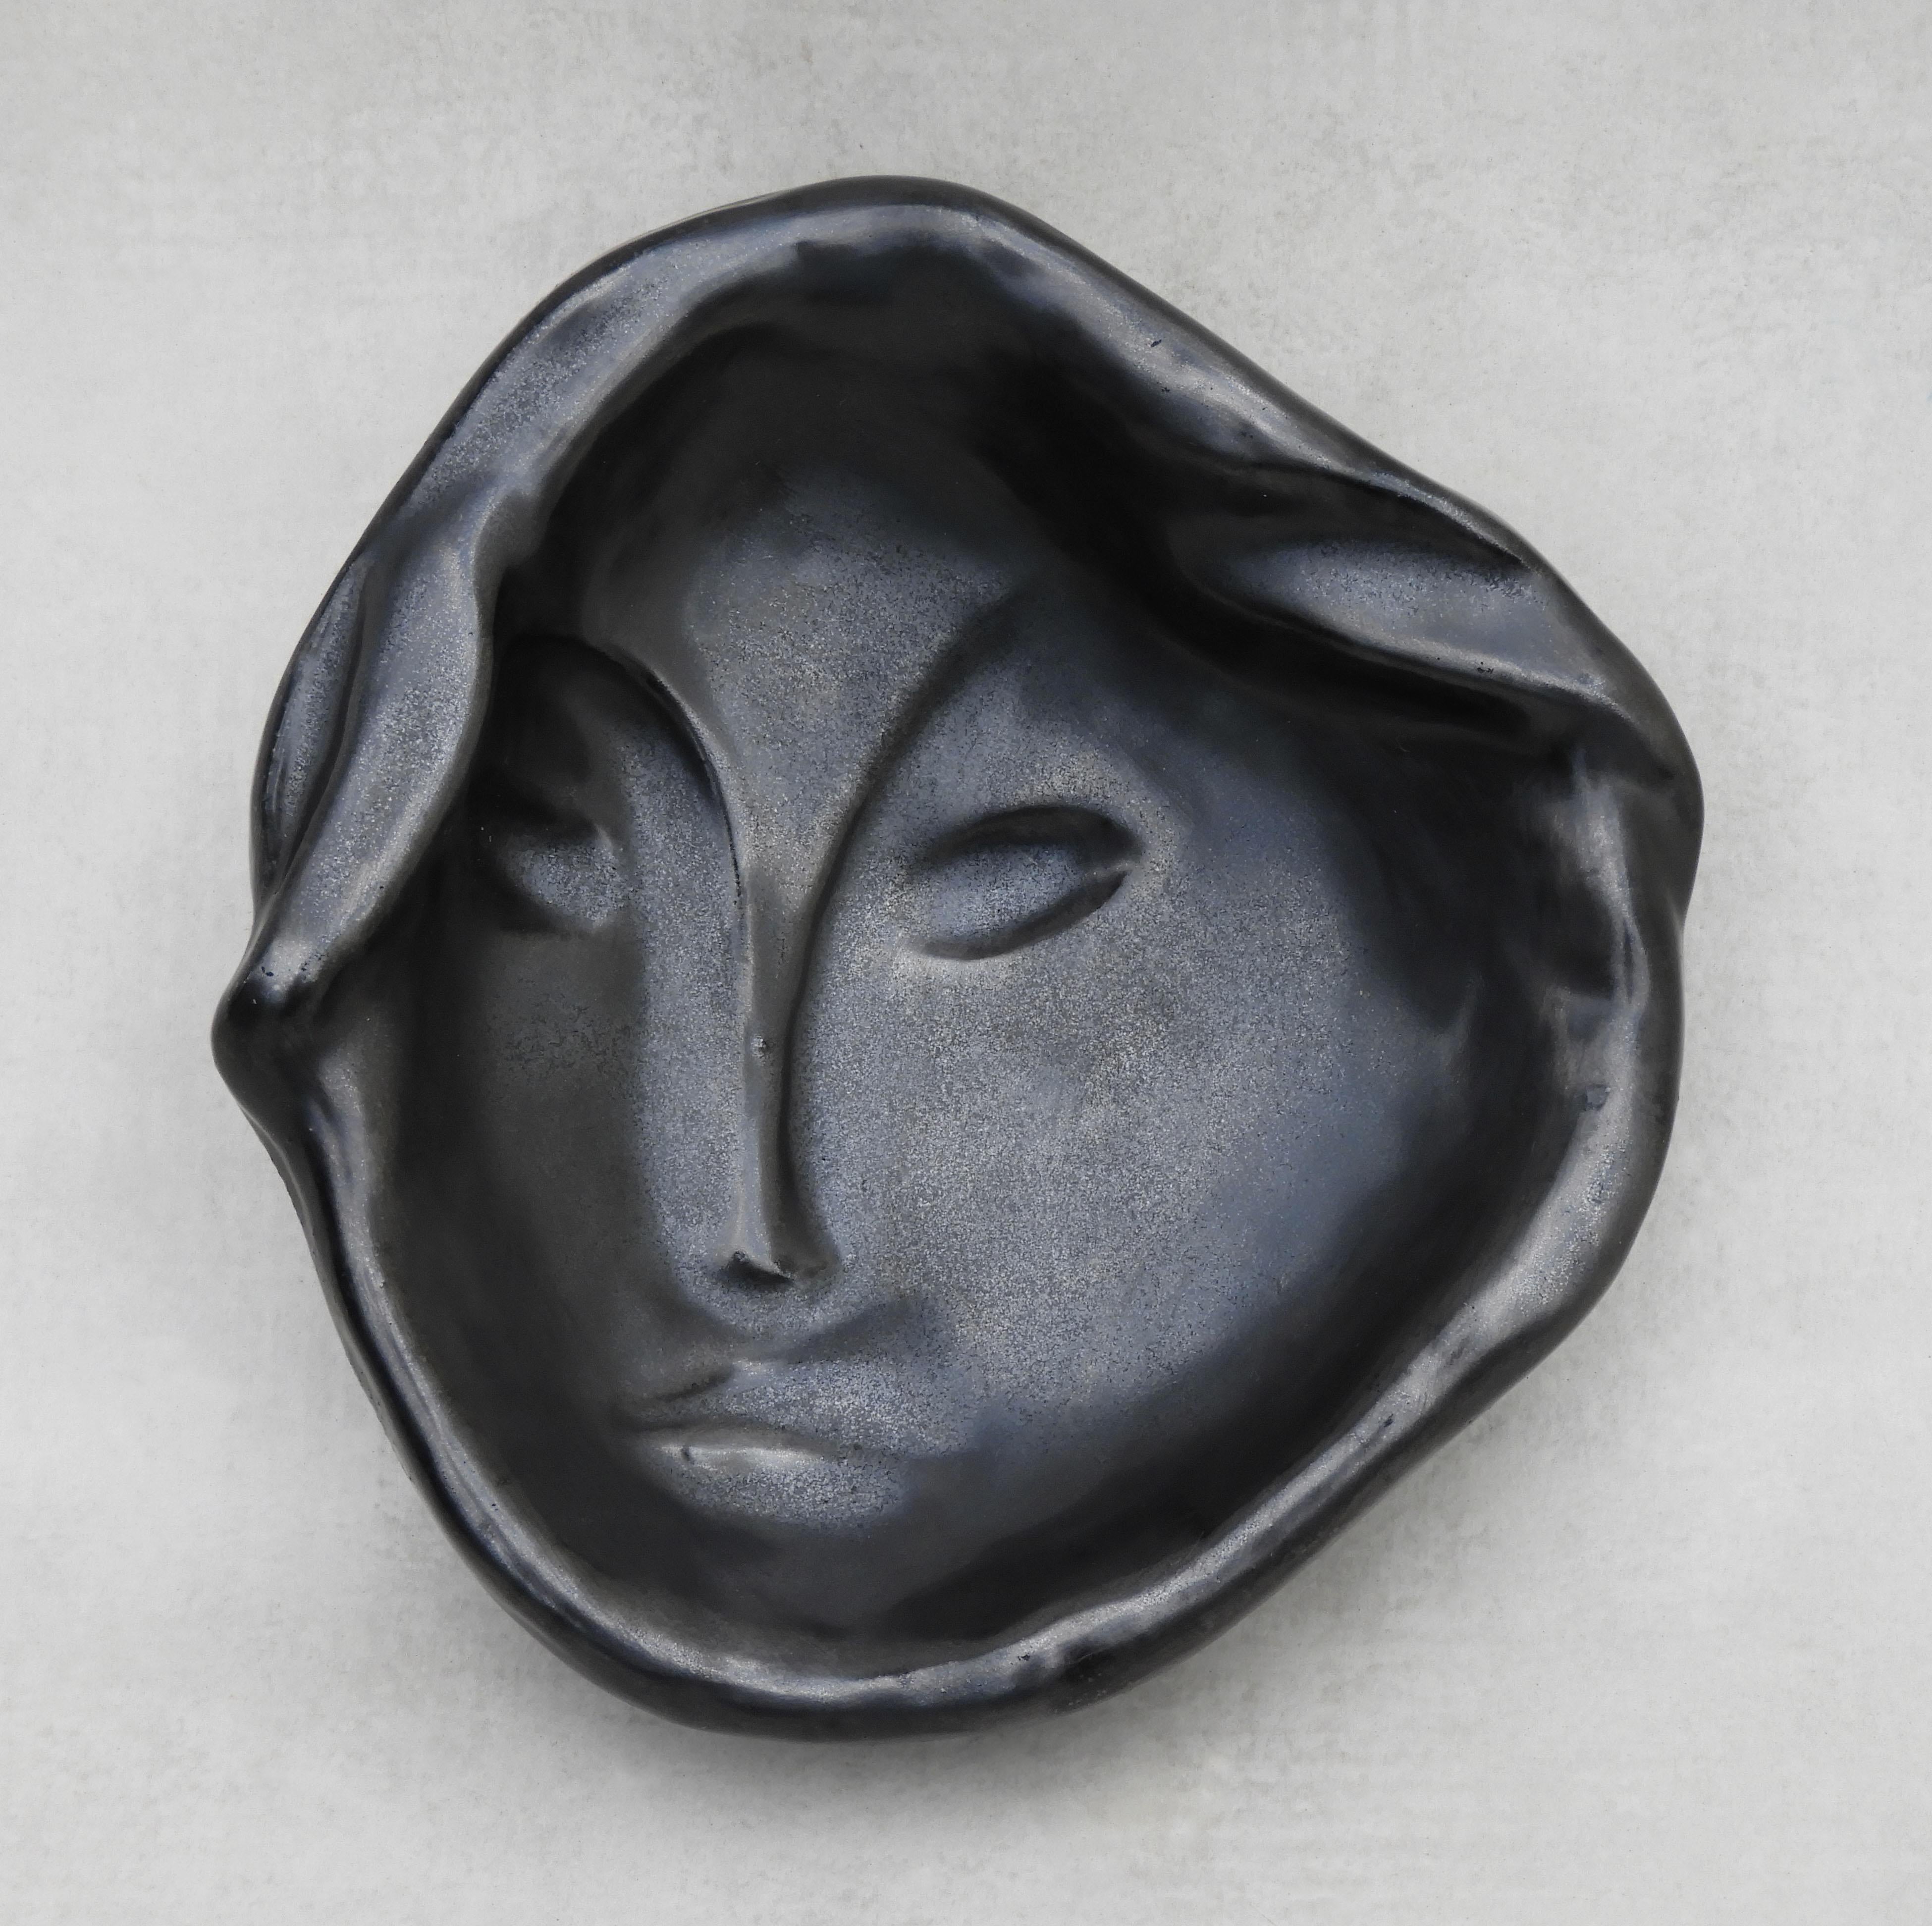 Elegant Vide Poche from French ceramic studio Ricard, 1950s France.

Beautifully handcrafted catch-all dish, depicting the face of a young woman in concave bas-relief and finished in satin black glaze.

Stylishly simple, a gorgeous example of